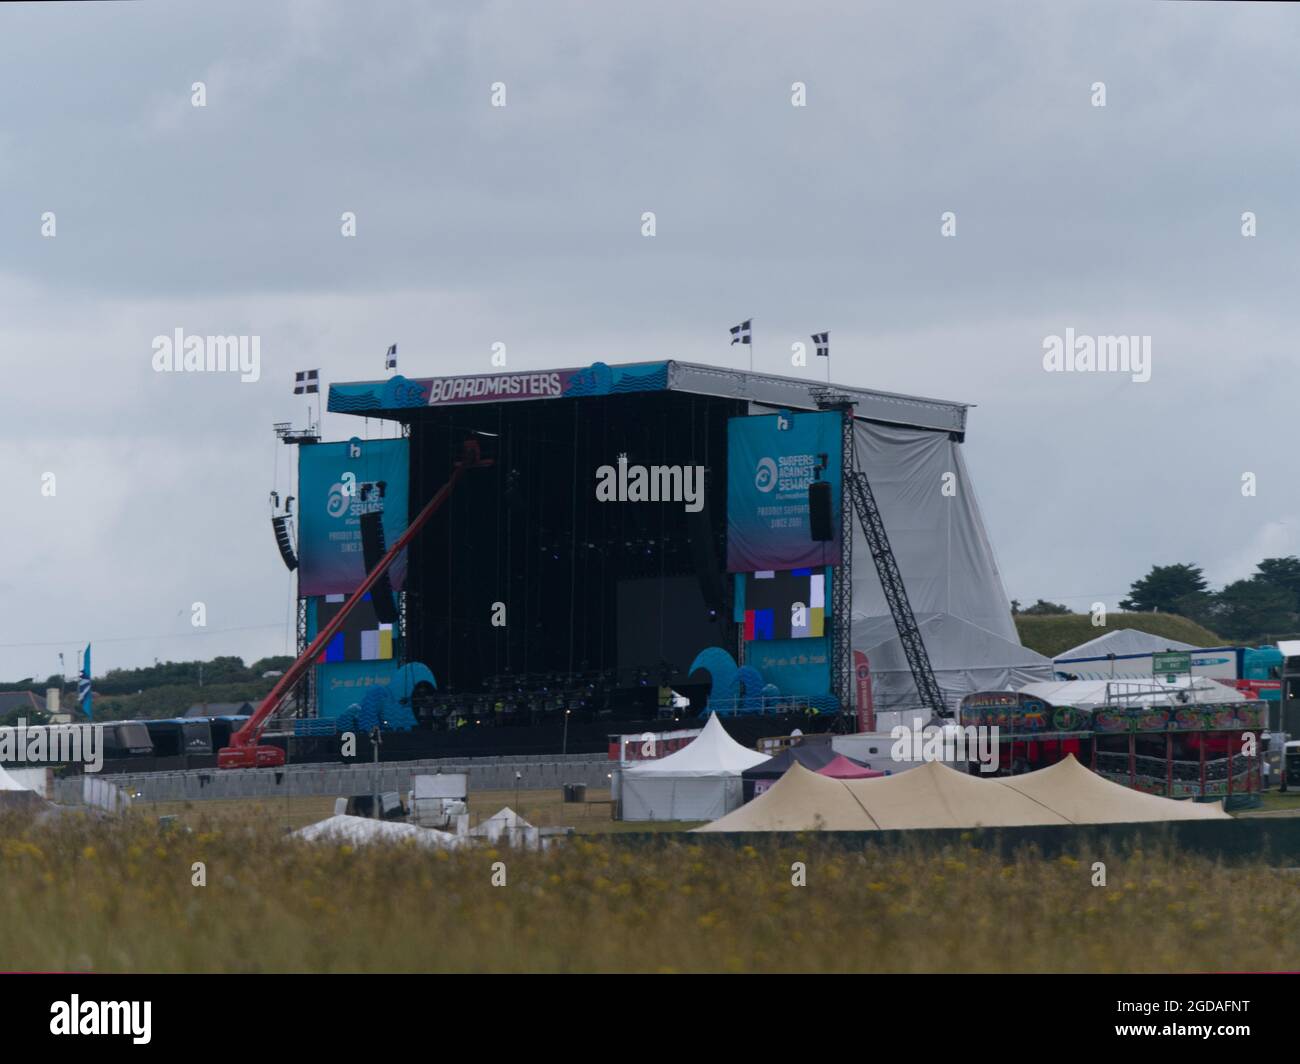 Newquay, Cornwall. 12:00 hours. The Boardmasters 2021 Music and surf festival near Watergate Bay. A Tent and Tipi village created on adjacent farmland to accommadate the tens of thousands expected. Foals Gorillaz and Jorja Smith headline. the Kooks.Also Loyle Carner, Jaie xx, Lianne La Havas an  12th August 2021. Credit: Robert Taylor/Alamy Live News Stock Photo